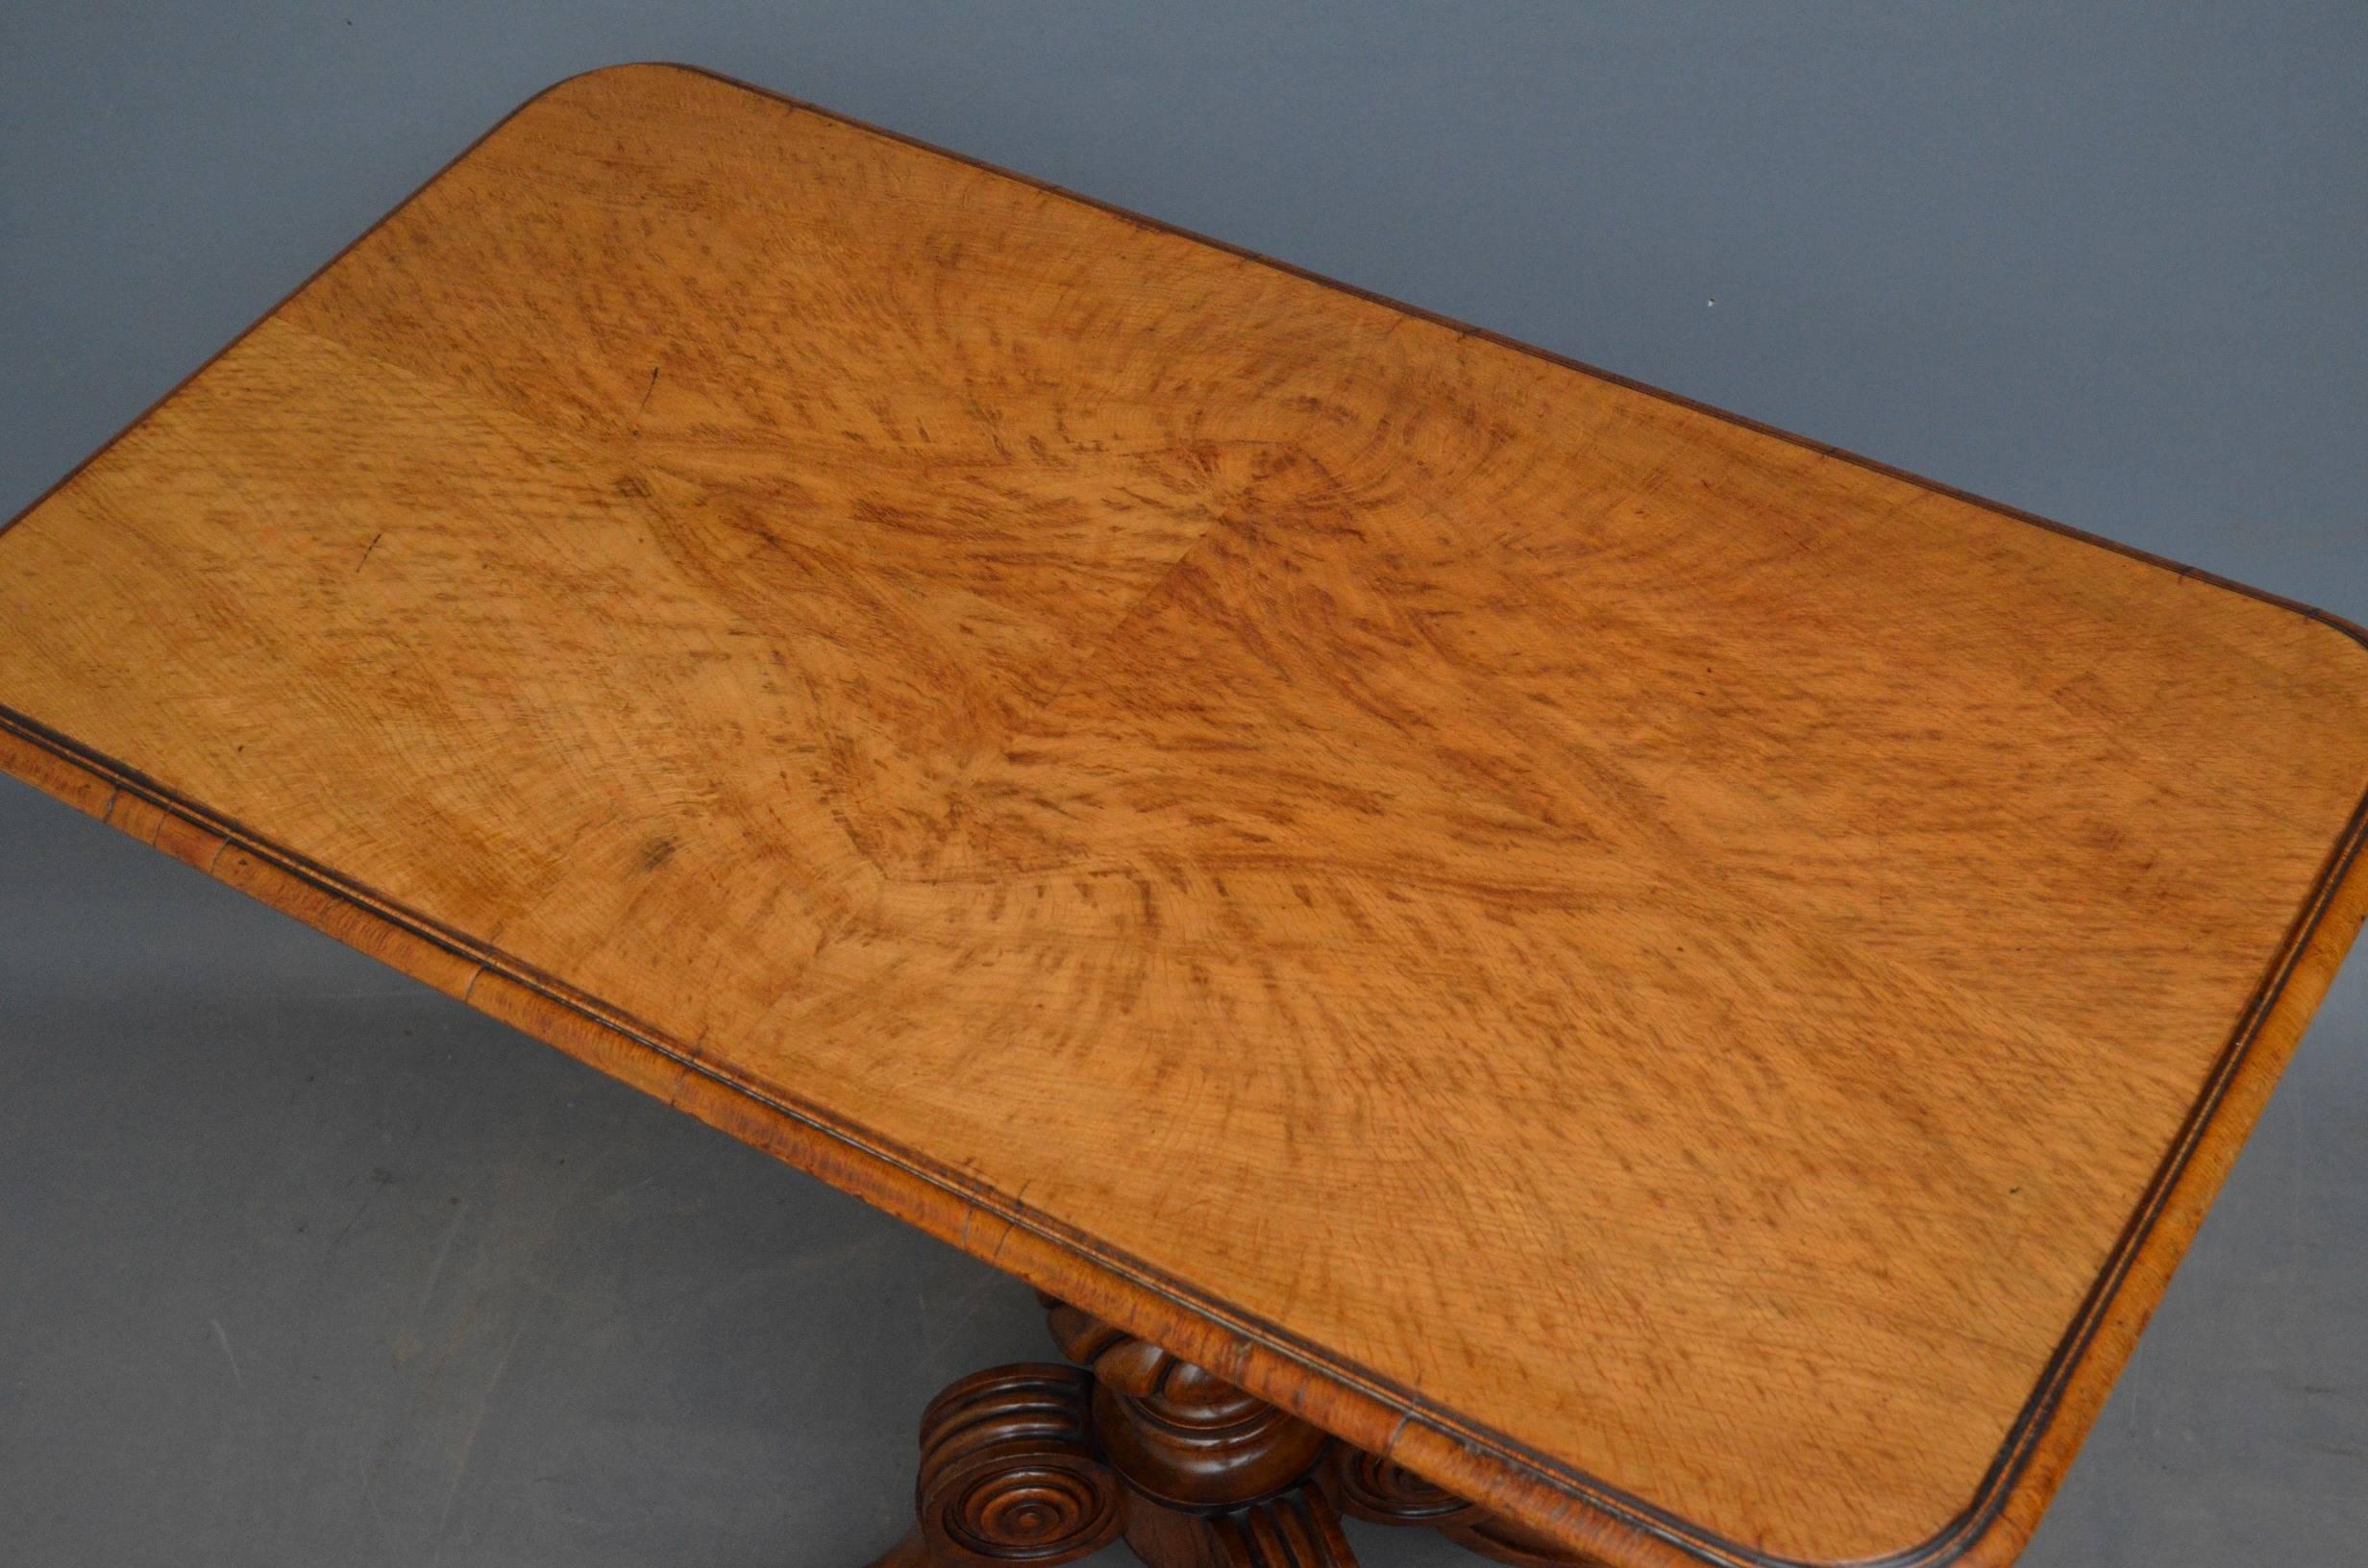 K0166 A finest quality and very stylish Victorian pollard oak table, having stunning pollard top with moulded edge raised on elegant, reeded column with carved collar terminating in four carved downswept legs and castors. This fabulous Victorian